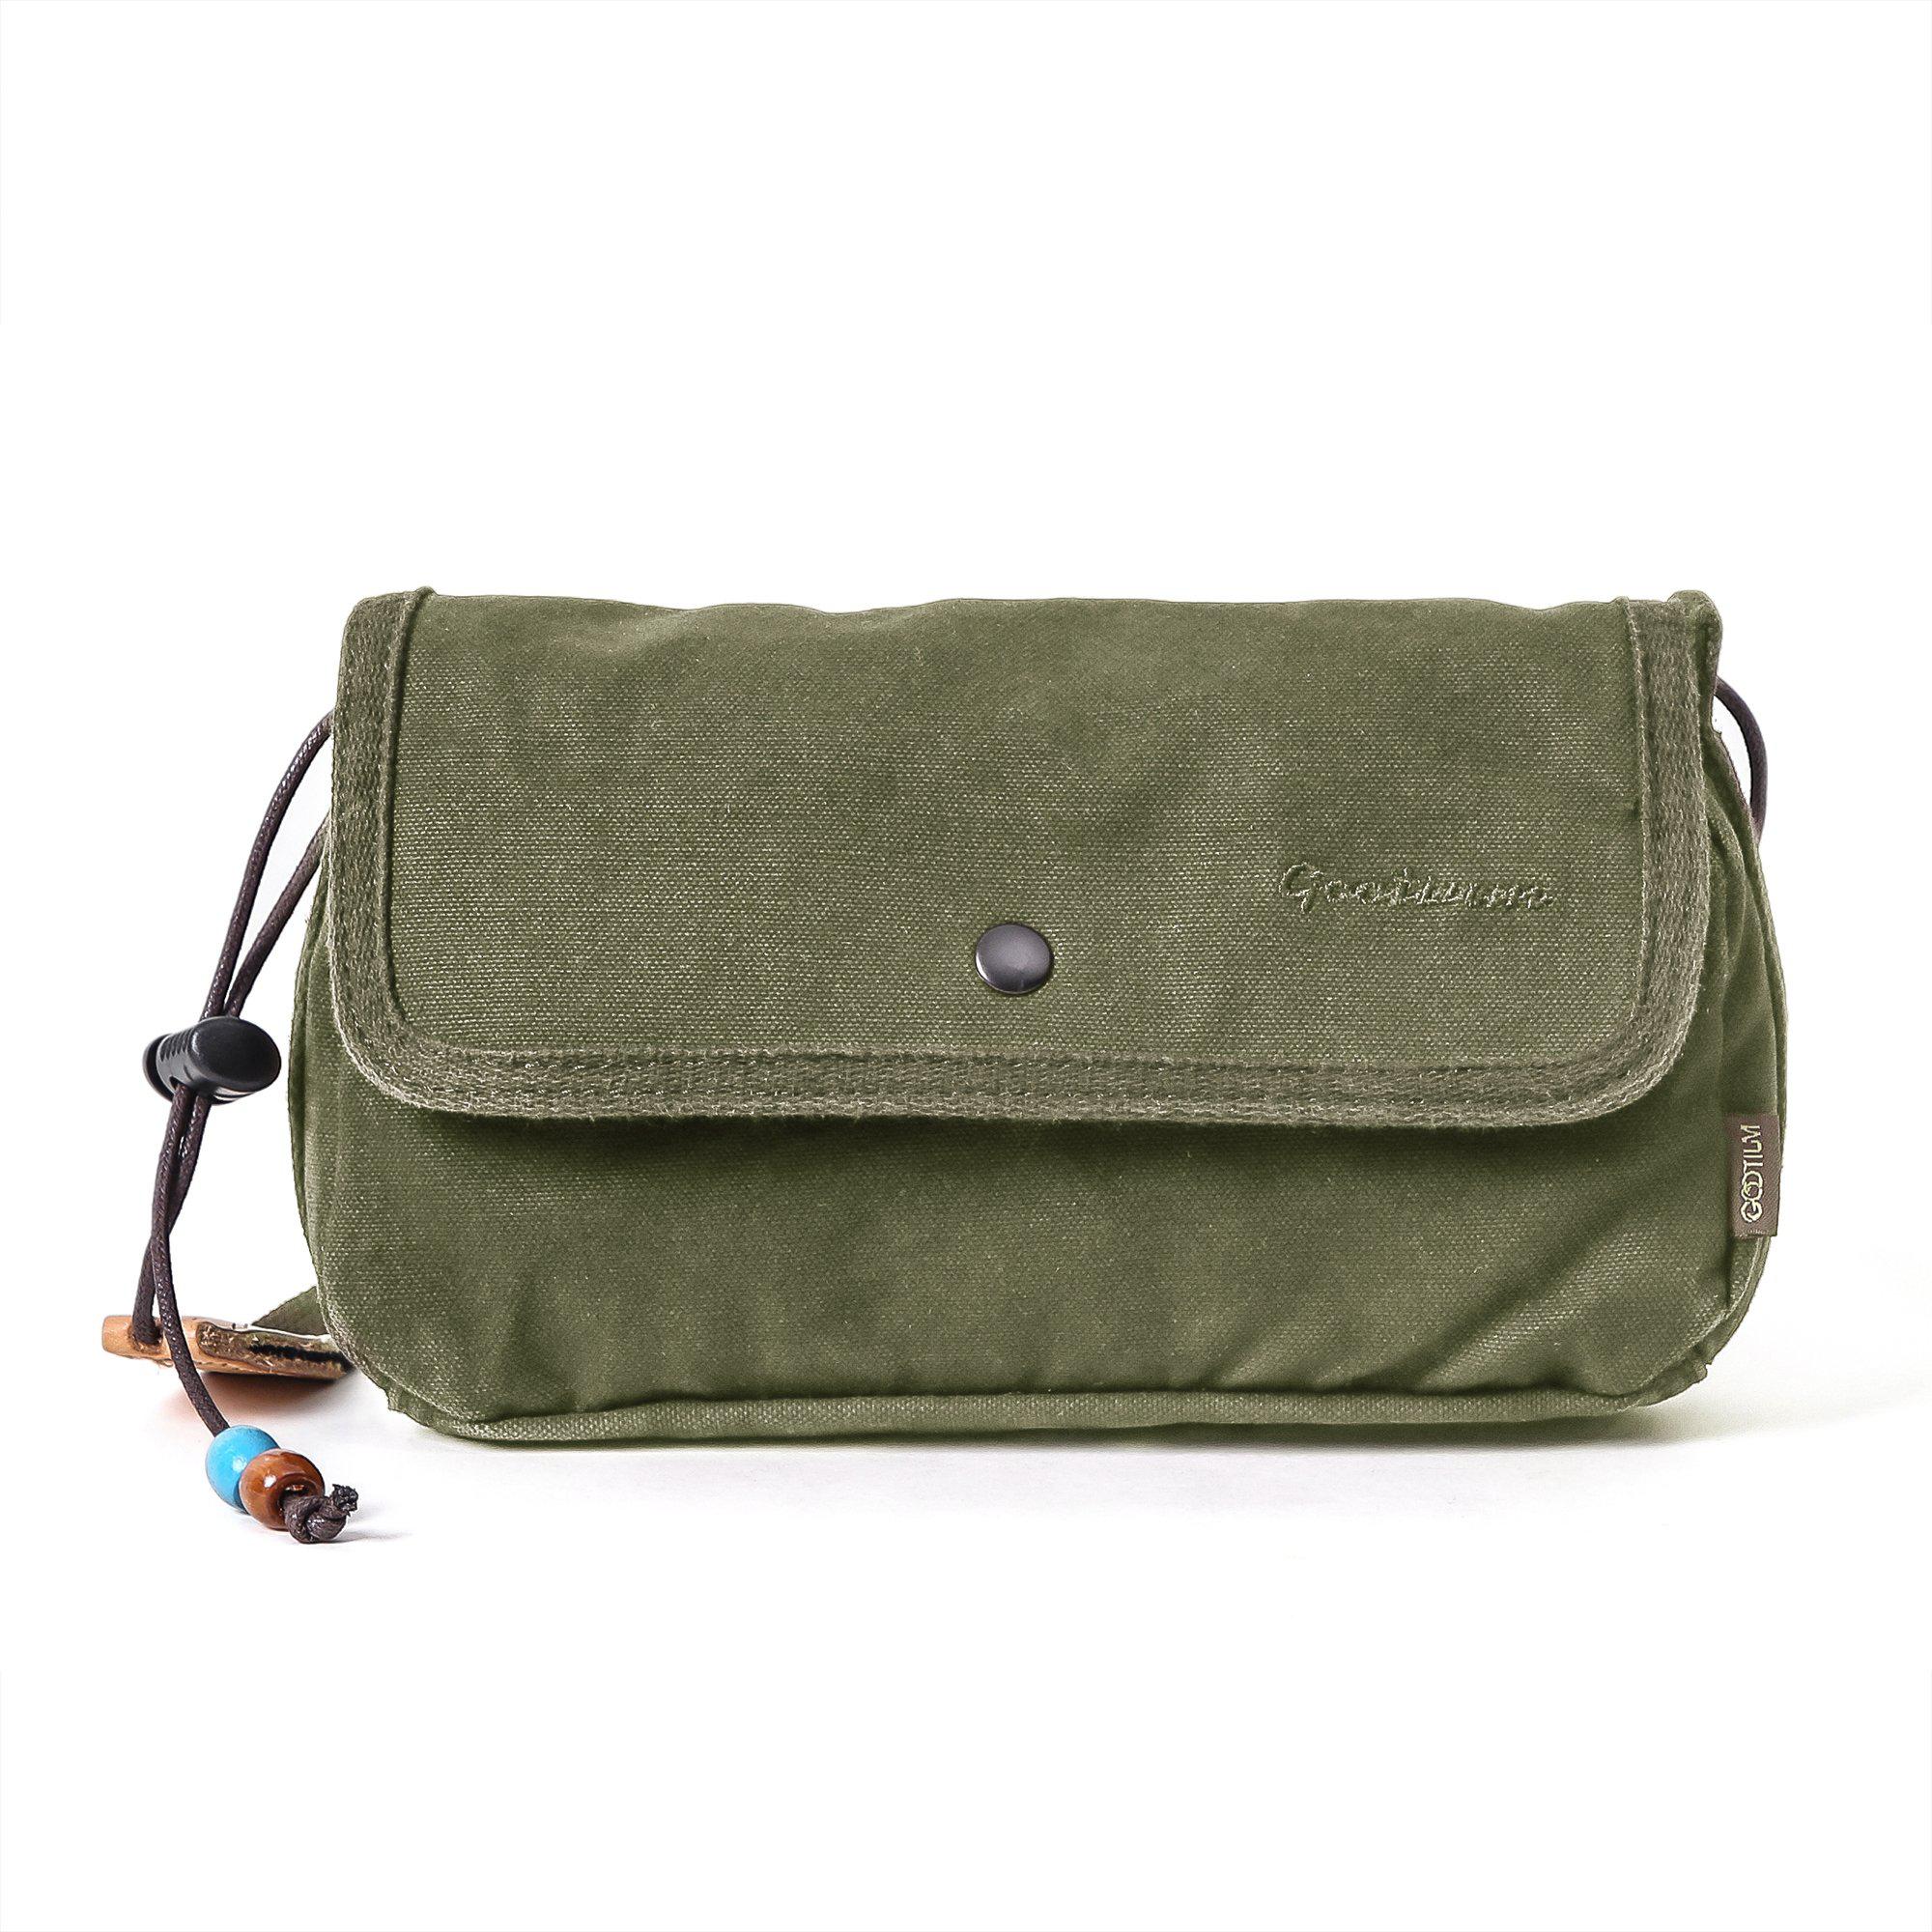 Canvas Zippered Backpack #G2001 Olive Green